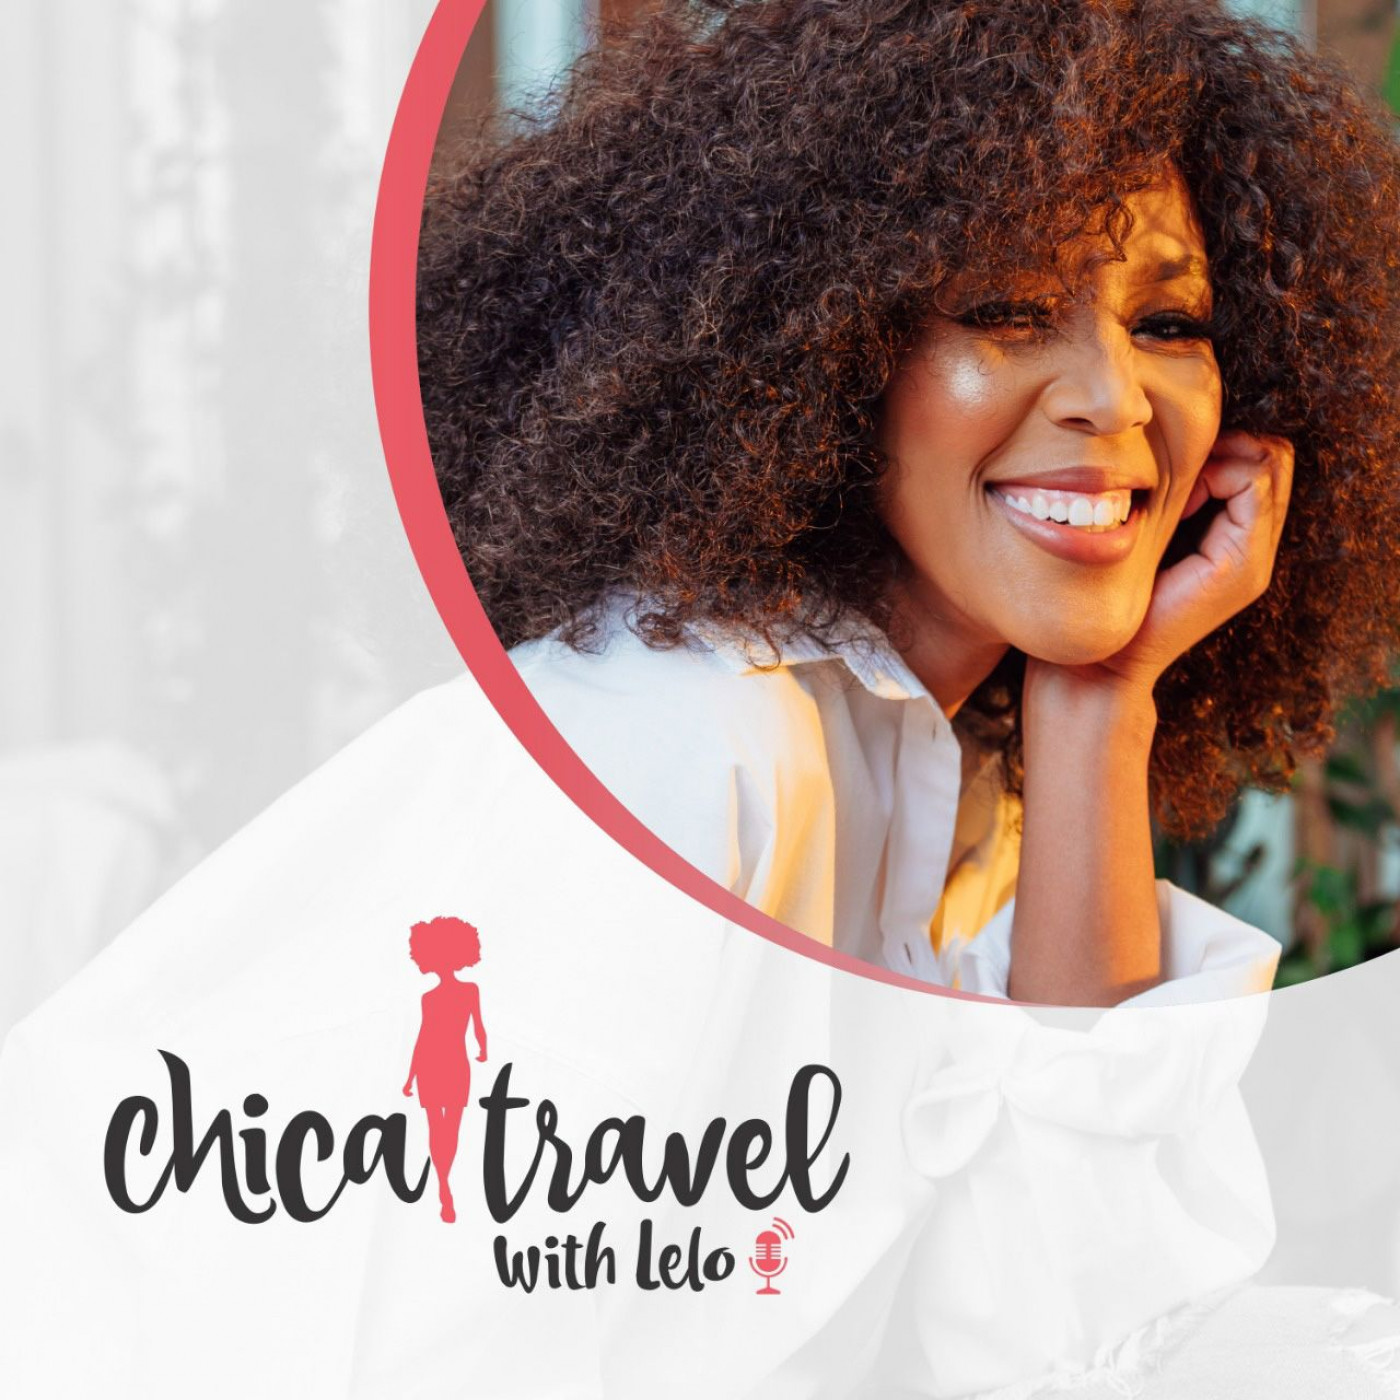 Chica Travel with Lelo